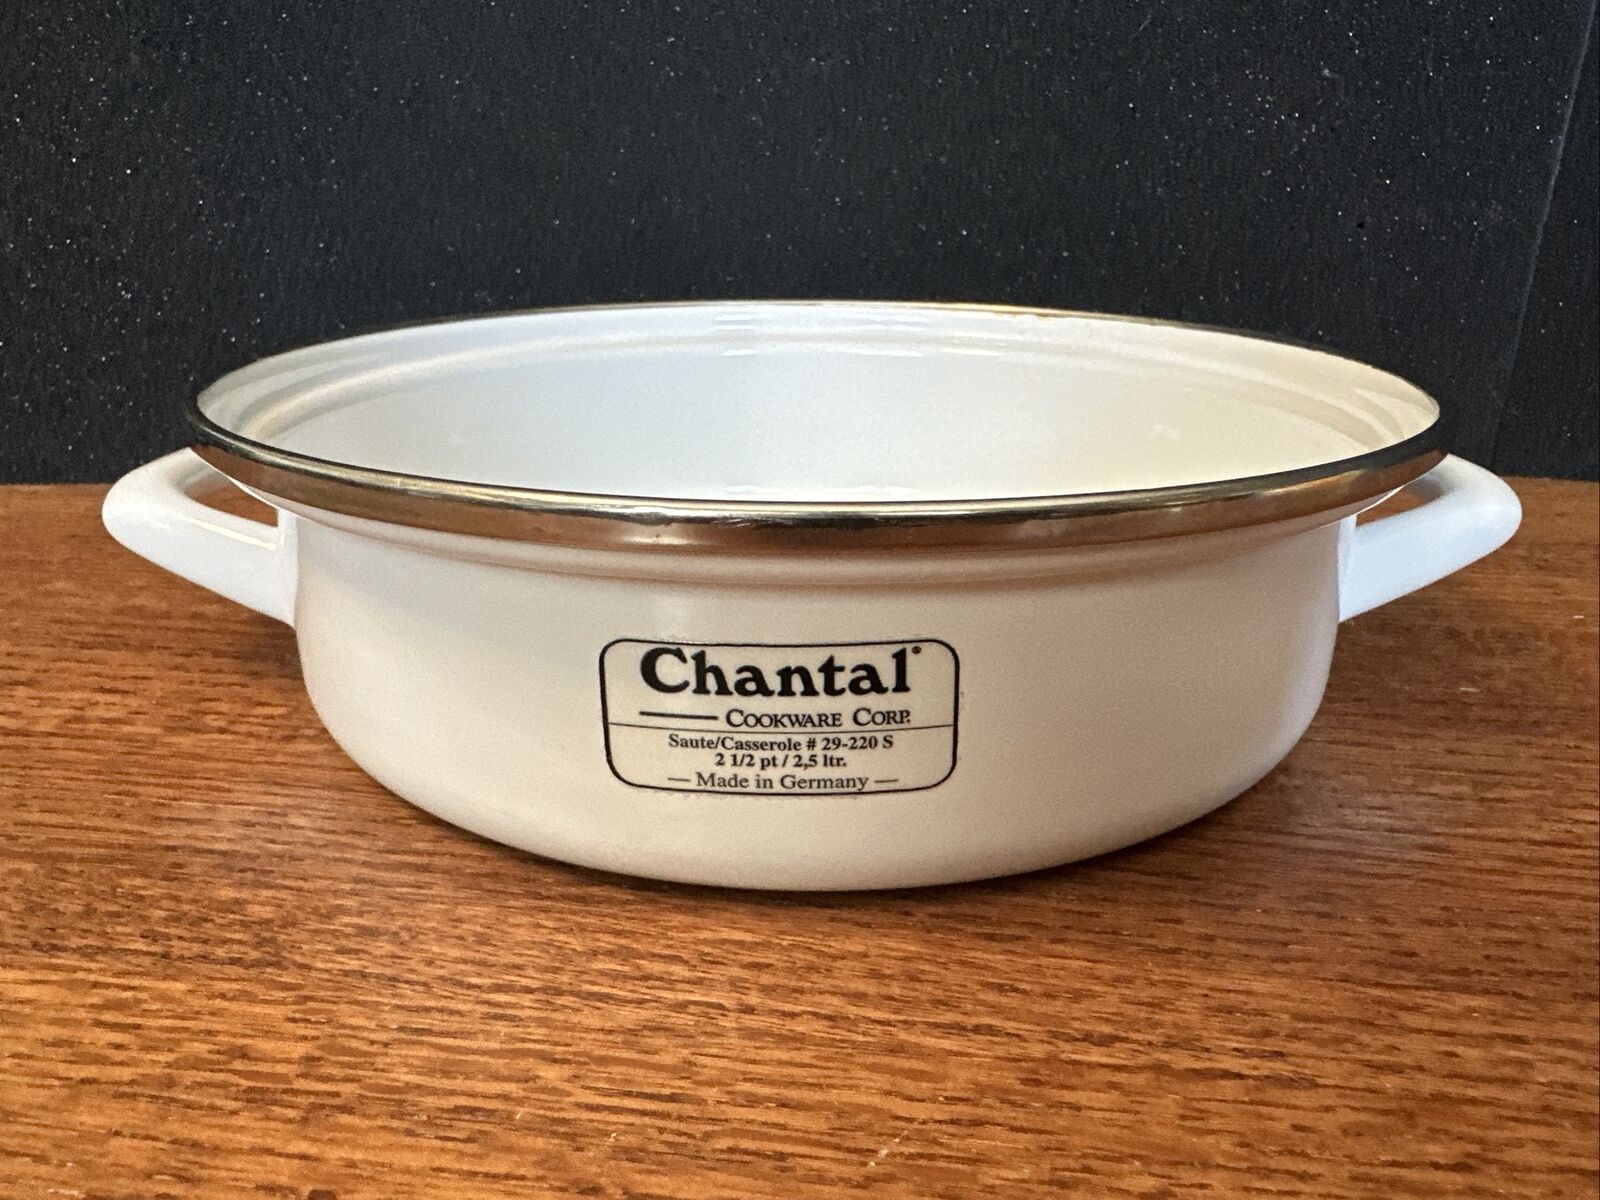 REAL Chantal Cookware Sauté Casserole 29-220 S 2.5 Pint Made In Germany White